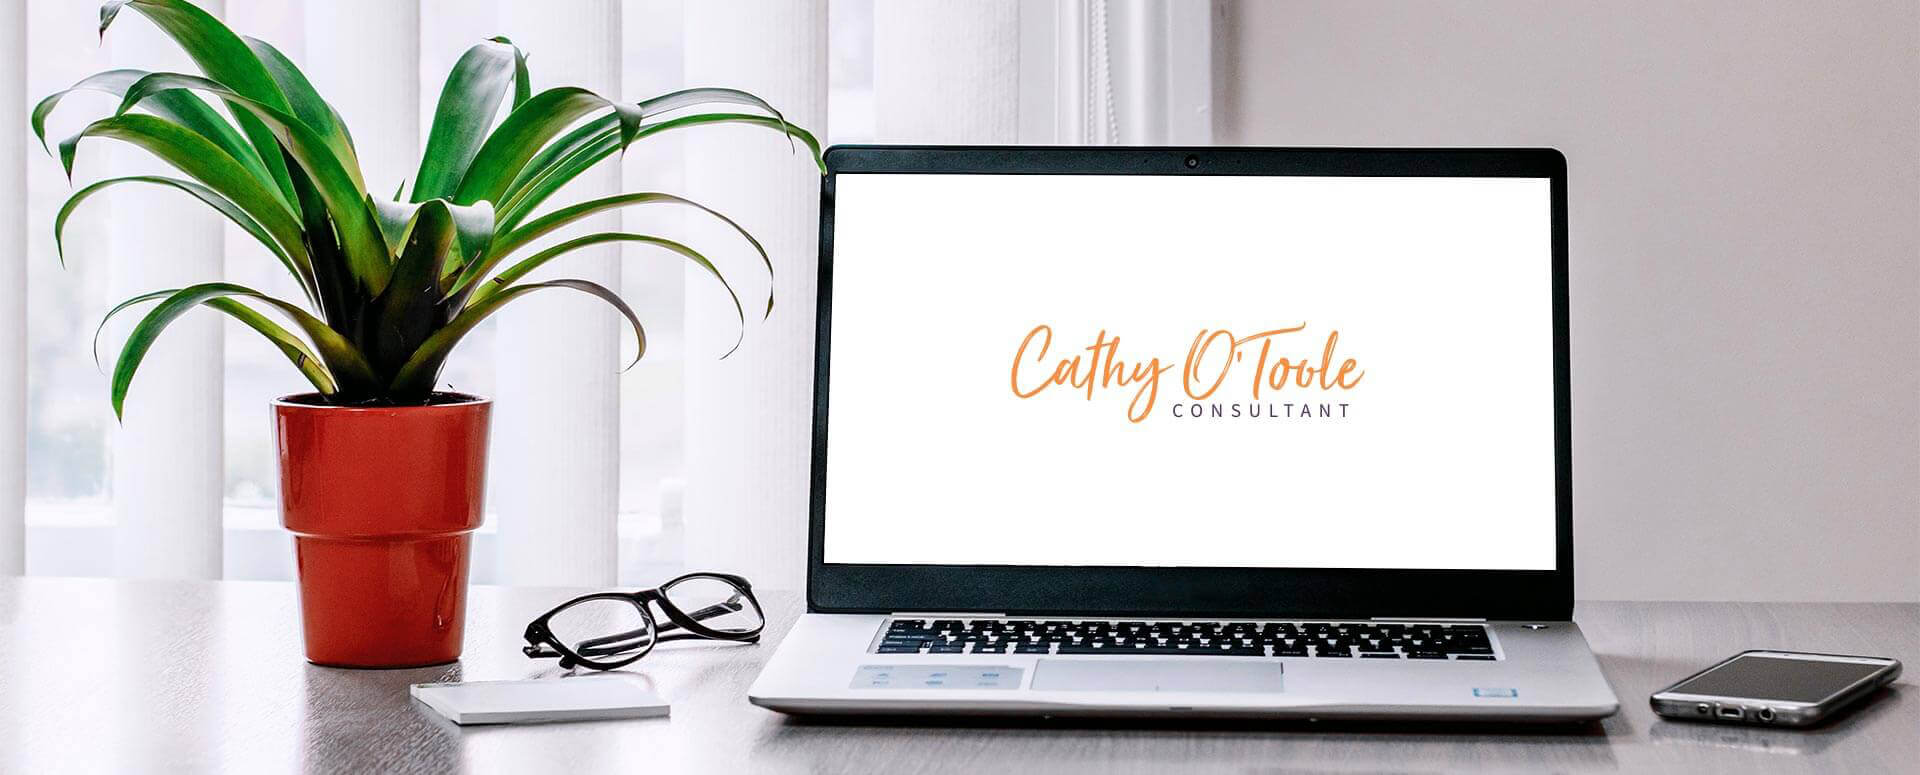 Collaborate and working with Cathy O'Toole